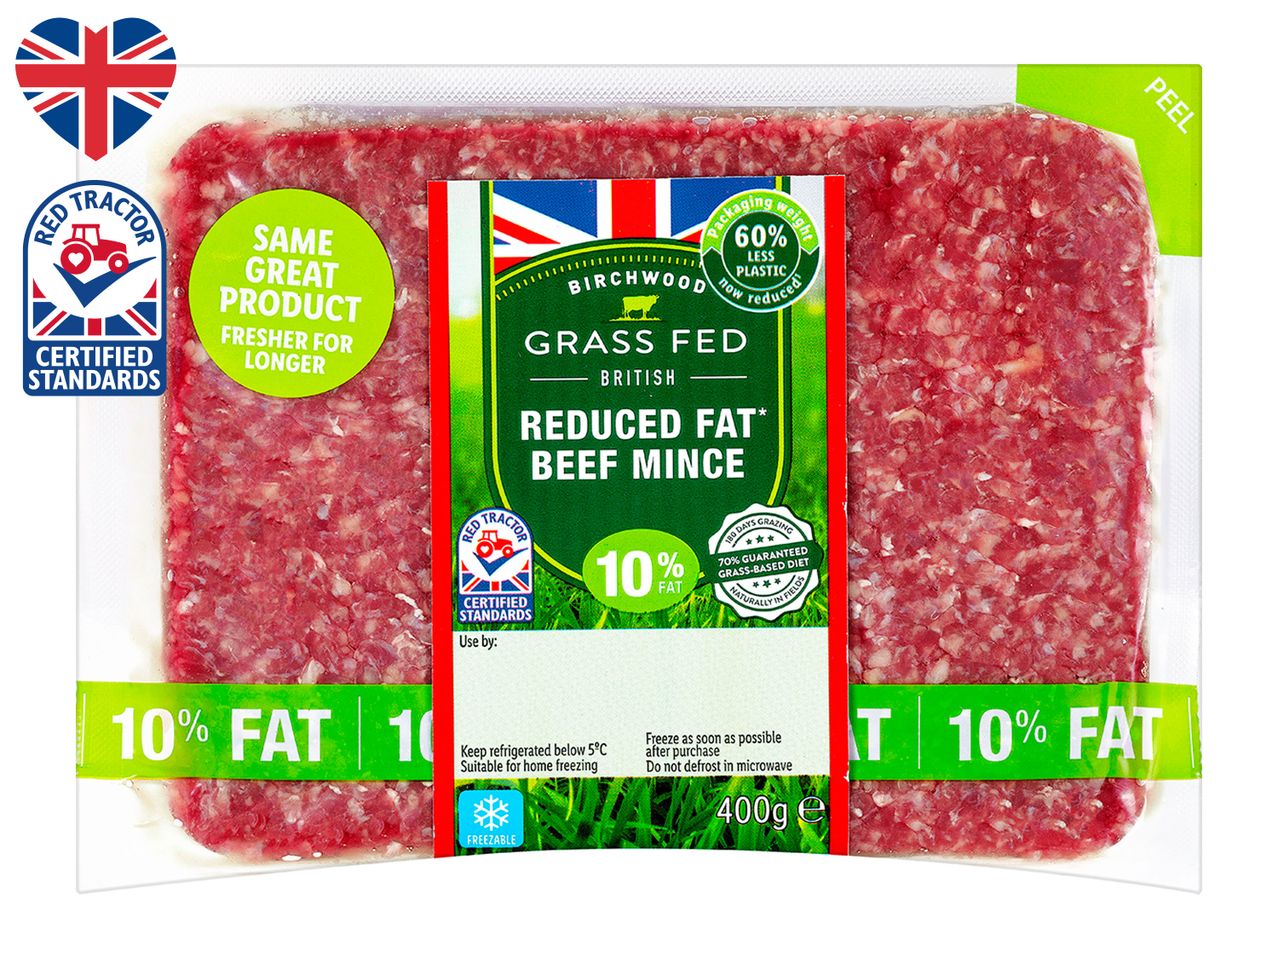 Go to full screen view: Birchwood Grass Fed British Reduced Fat Beef Mince 10% Fat - Image 1